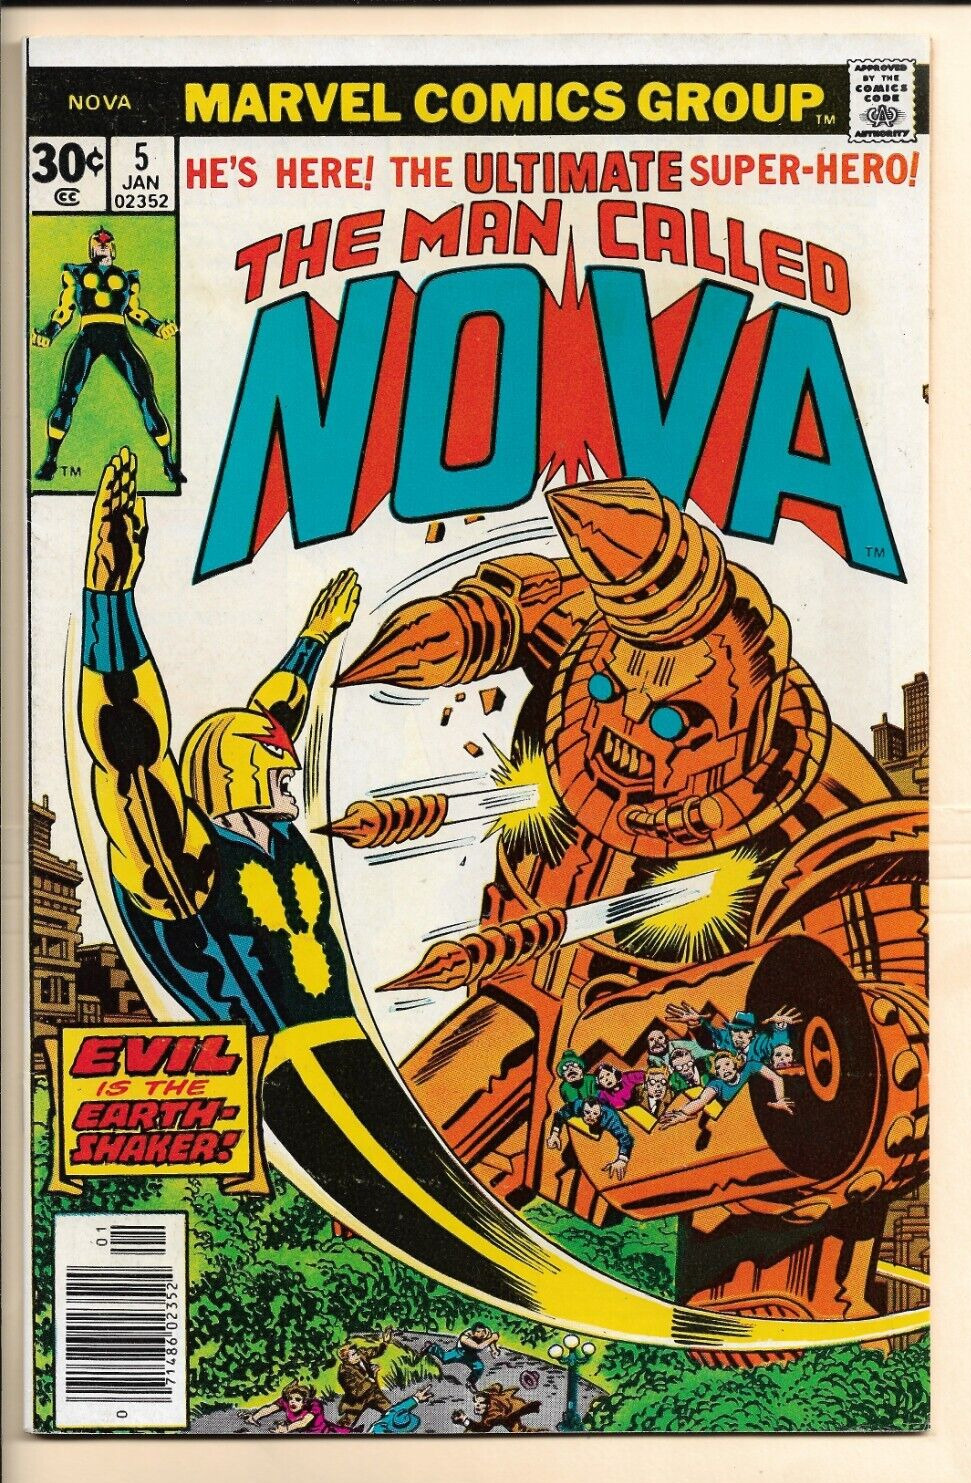 The Man Called Nova #5 VF+ (1977) 1st app the Earth Mover  New Warriors